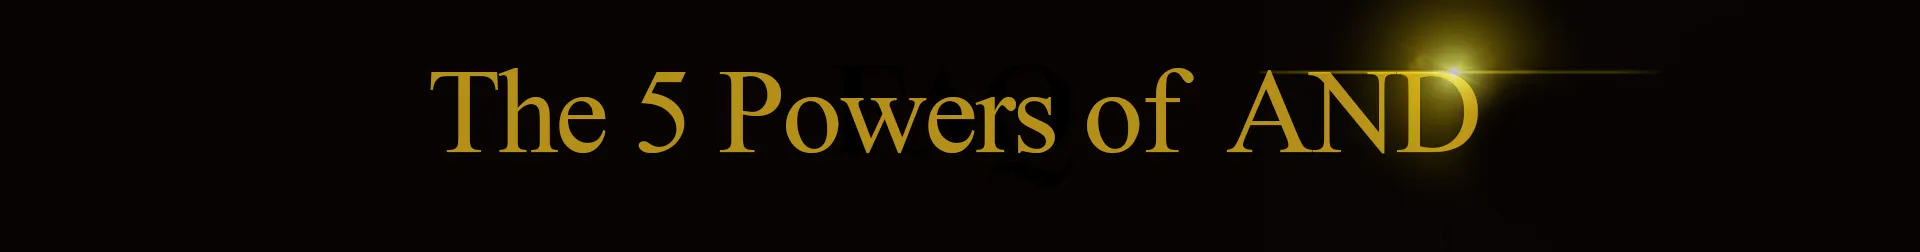 5 powers of AND